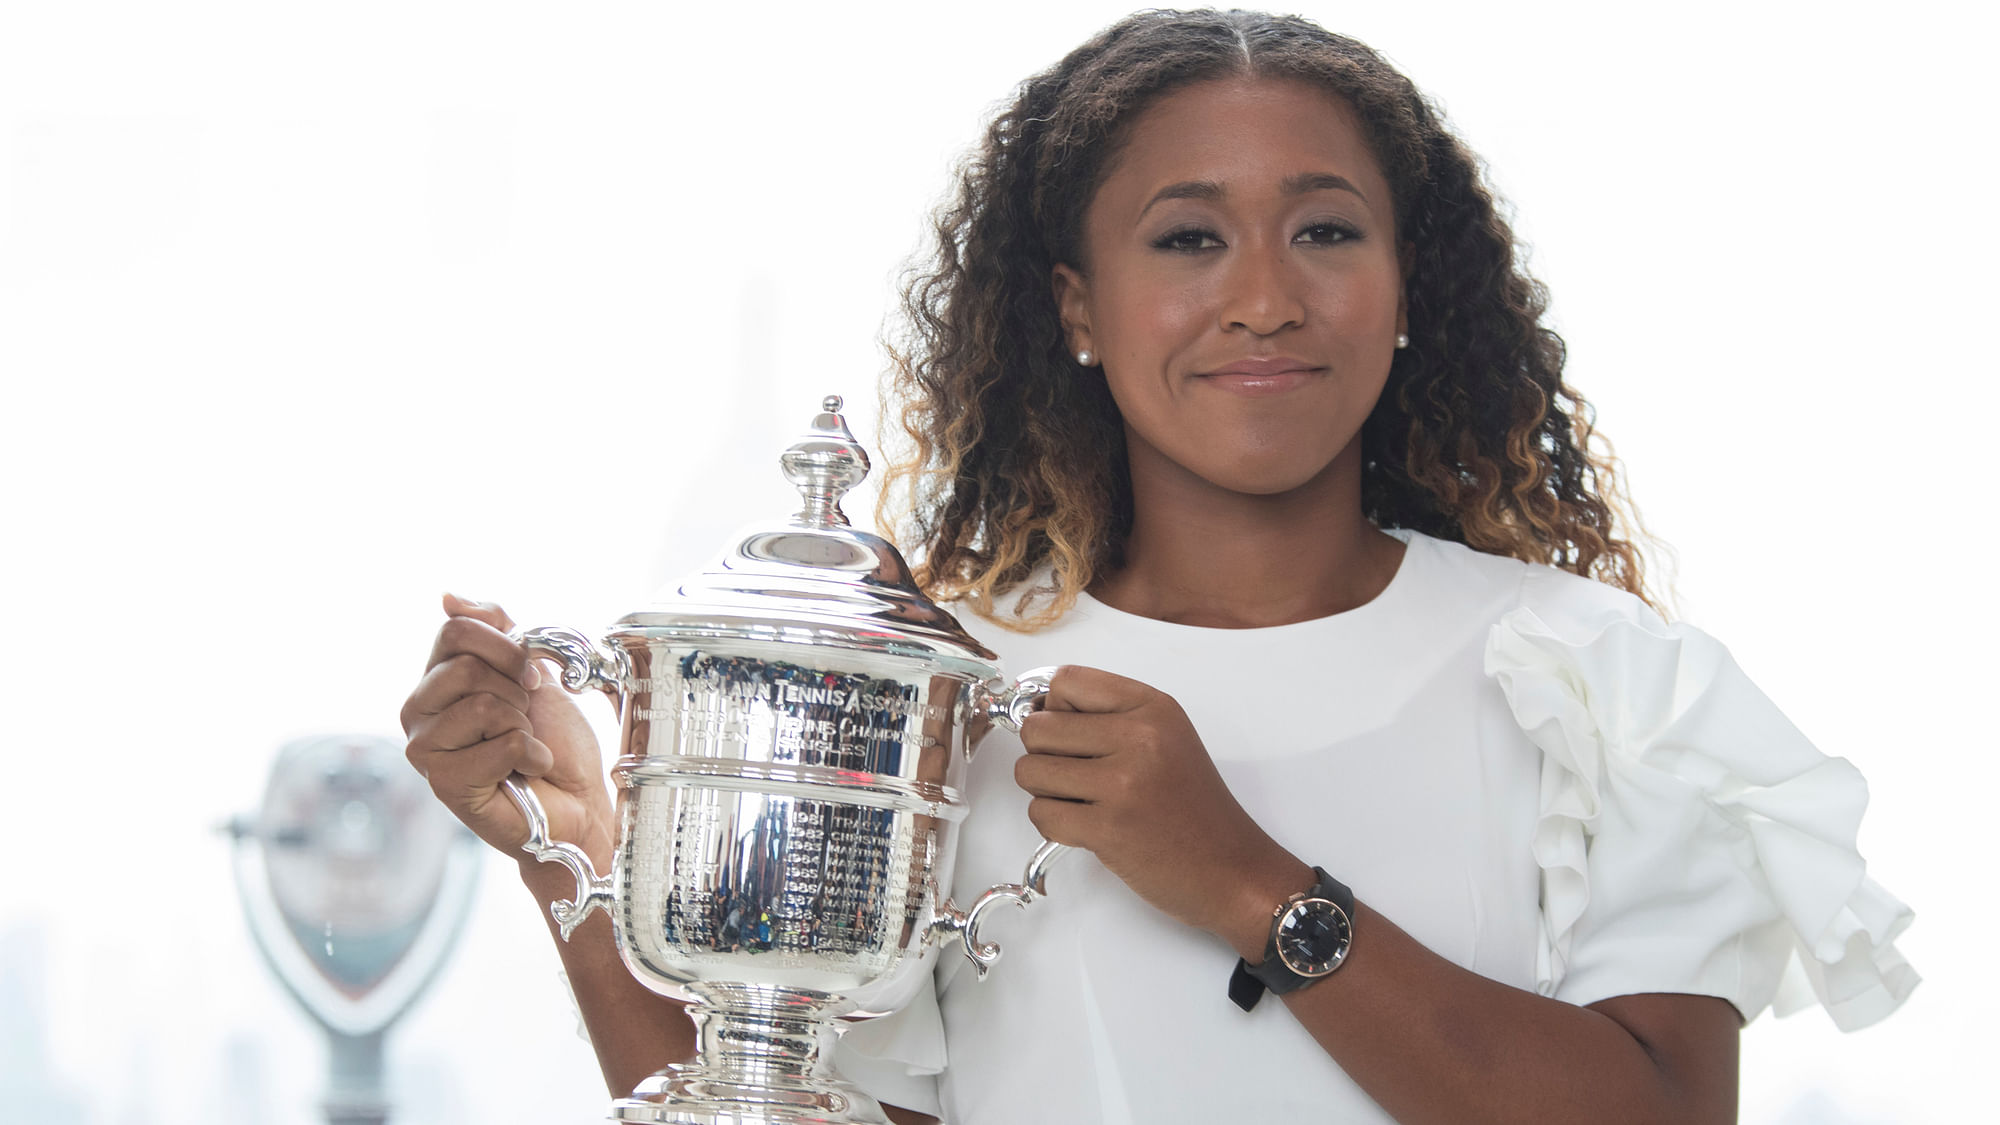 US Open women’s singles champion Naomi Osaka poses for photographers with her trophy at Top of the Rock Observation Deck at Rockefeller Center, Sunday, Sept. 9, 2018, in New York.&nbsp;